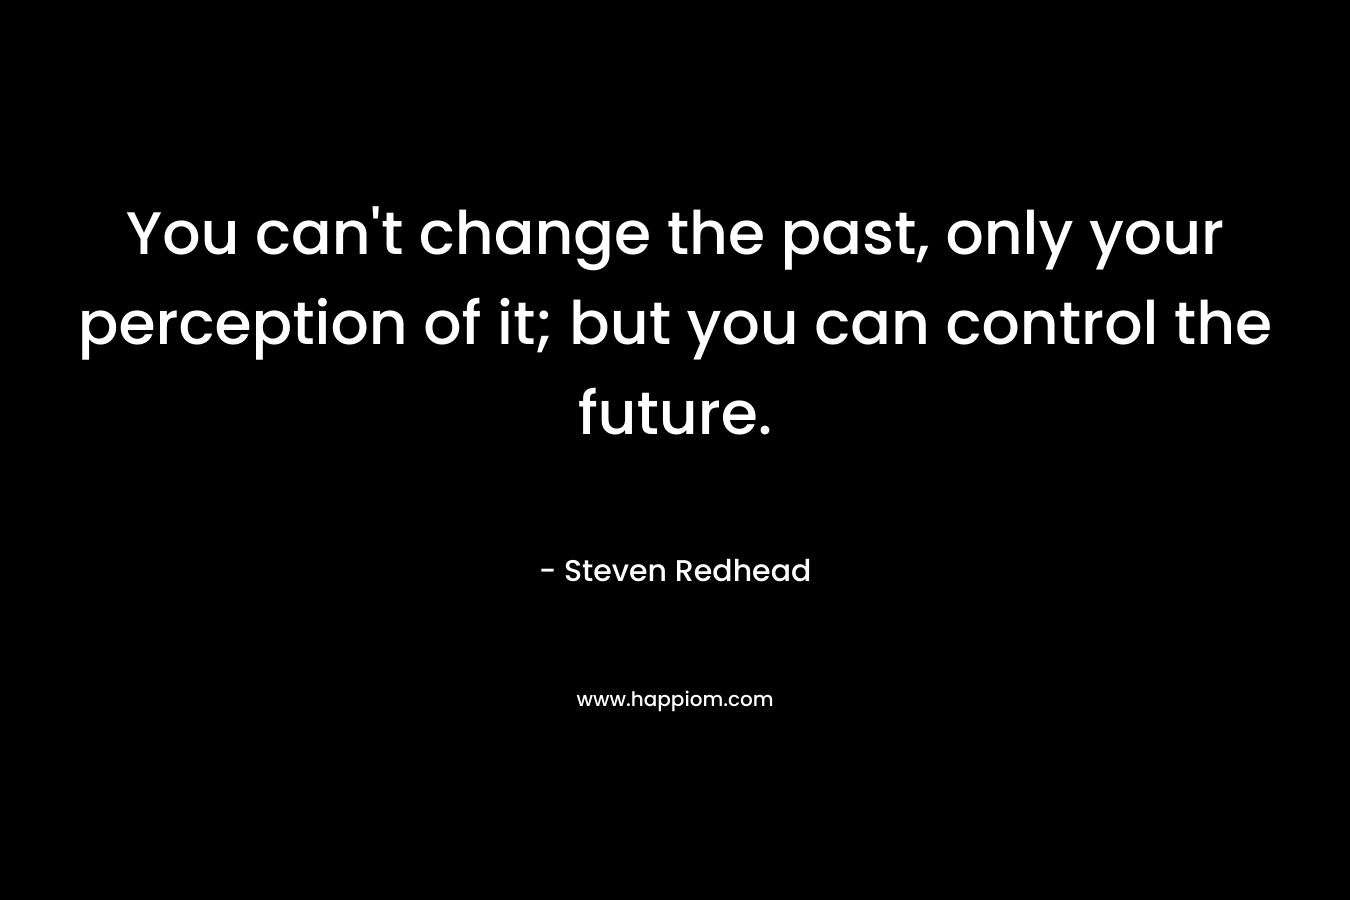 You can't change the past, only your perception of it; but you can control the future.